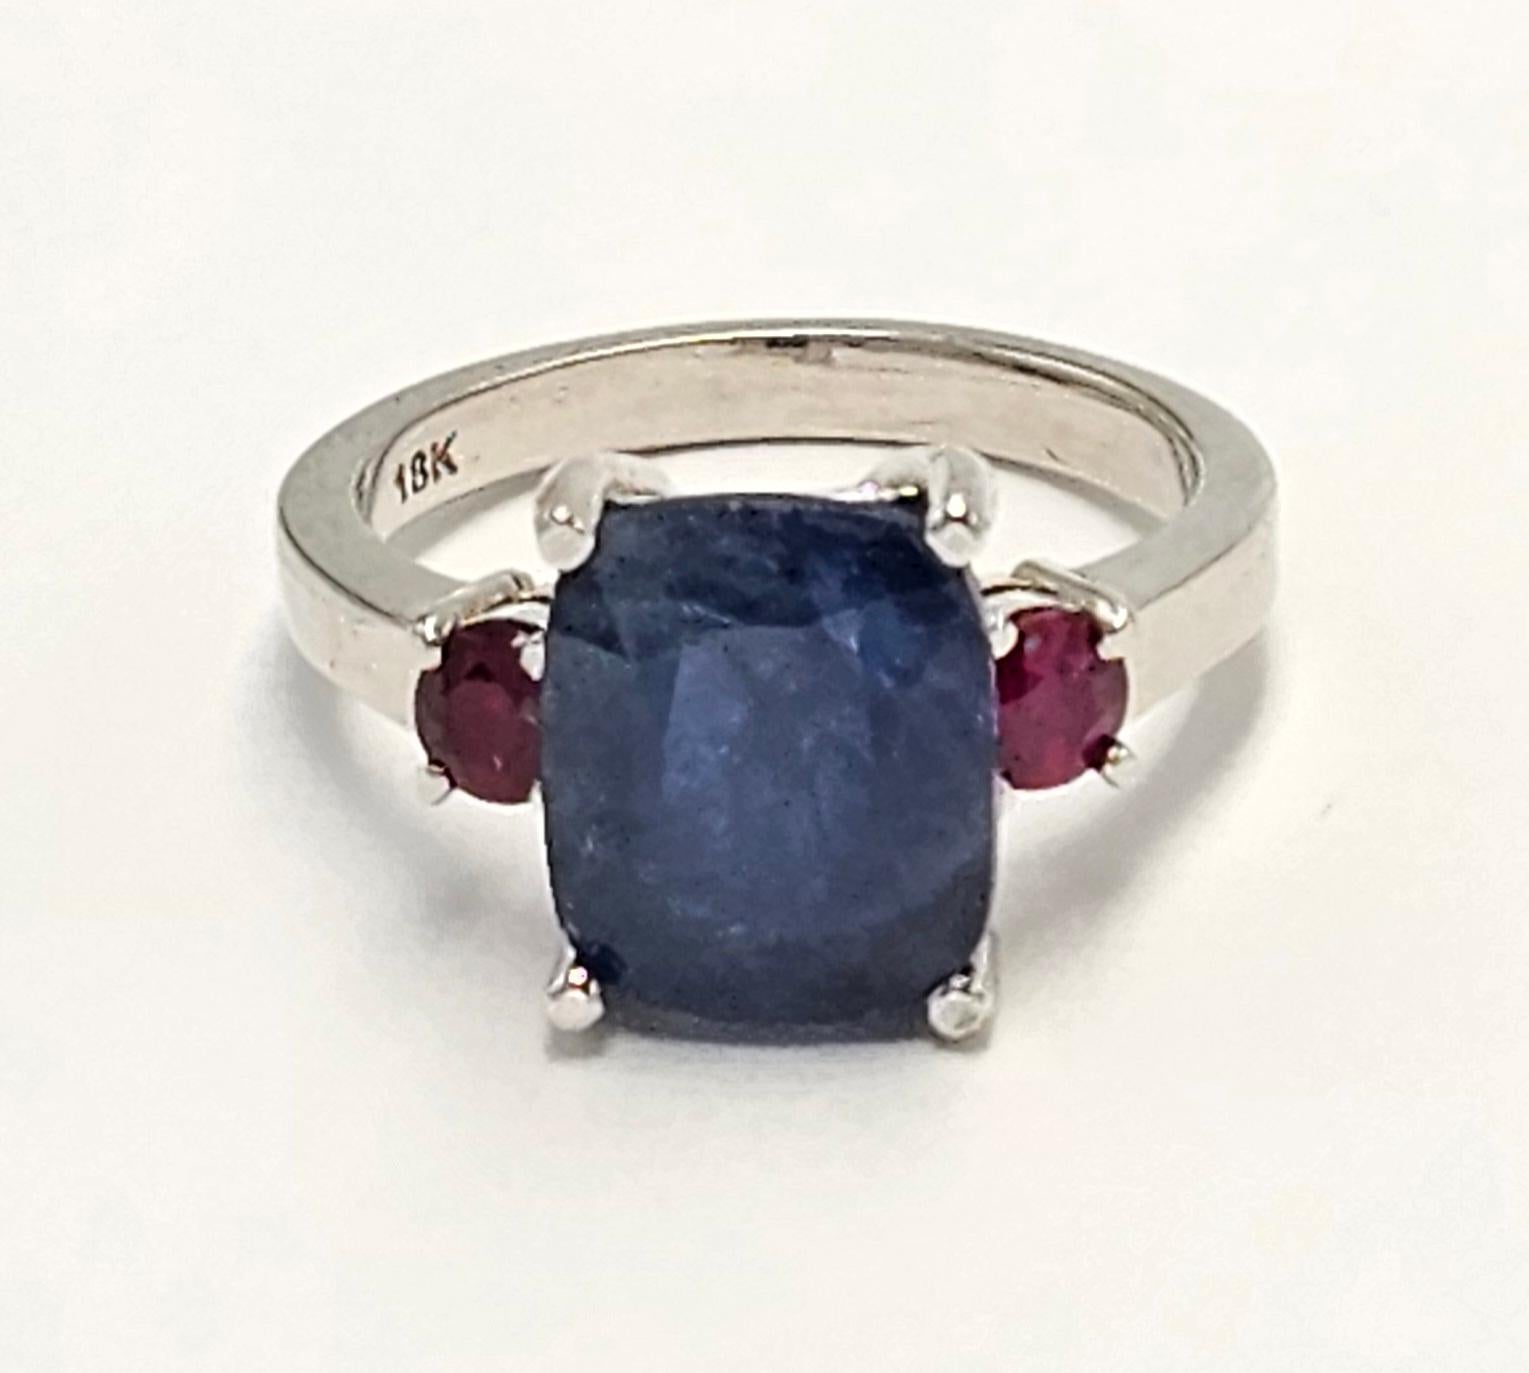 Set in a custom designed 18K white Gold ring, surrounded by beautiful and carefully curated pair of Burmese Rubies, this gorgeous AGL certified cushion shaped Natural Burmese Sapphire weighing 3.75 carats has a unique and rare combination of being